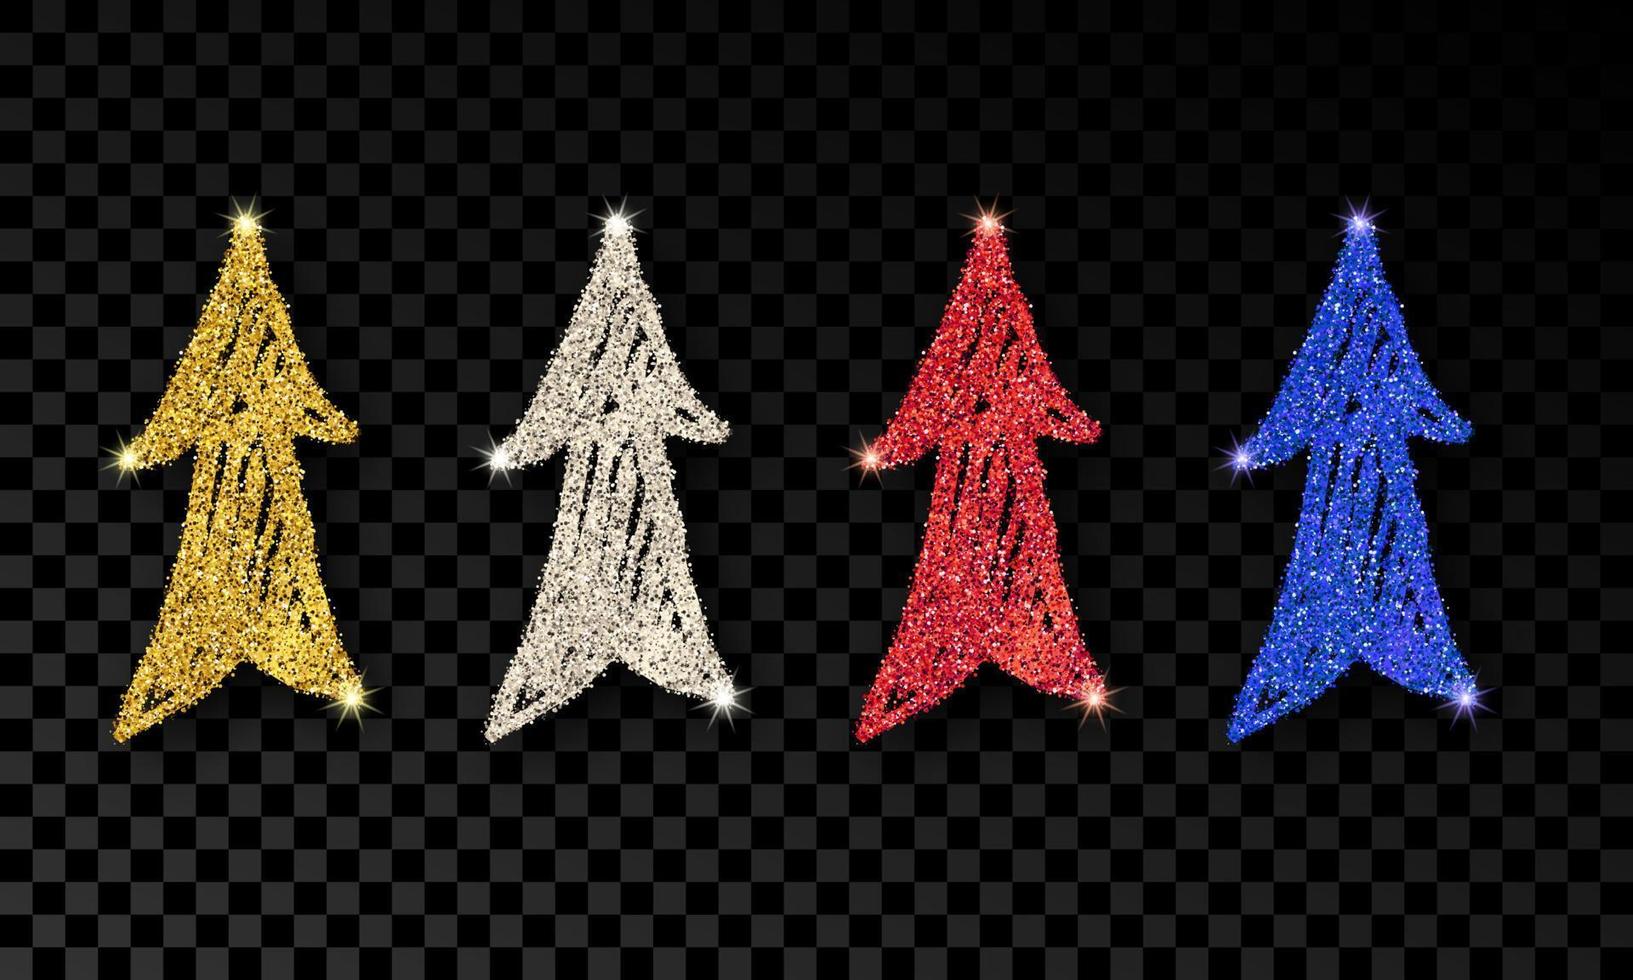 Set of four doodle hand drawn arrows with gold, silver, blue and red glitter effect on dark background. Vector illustration